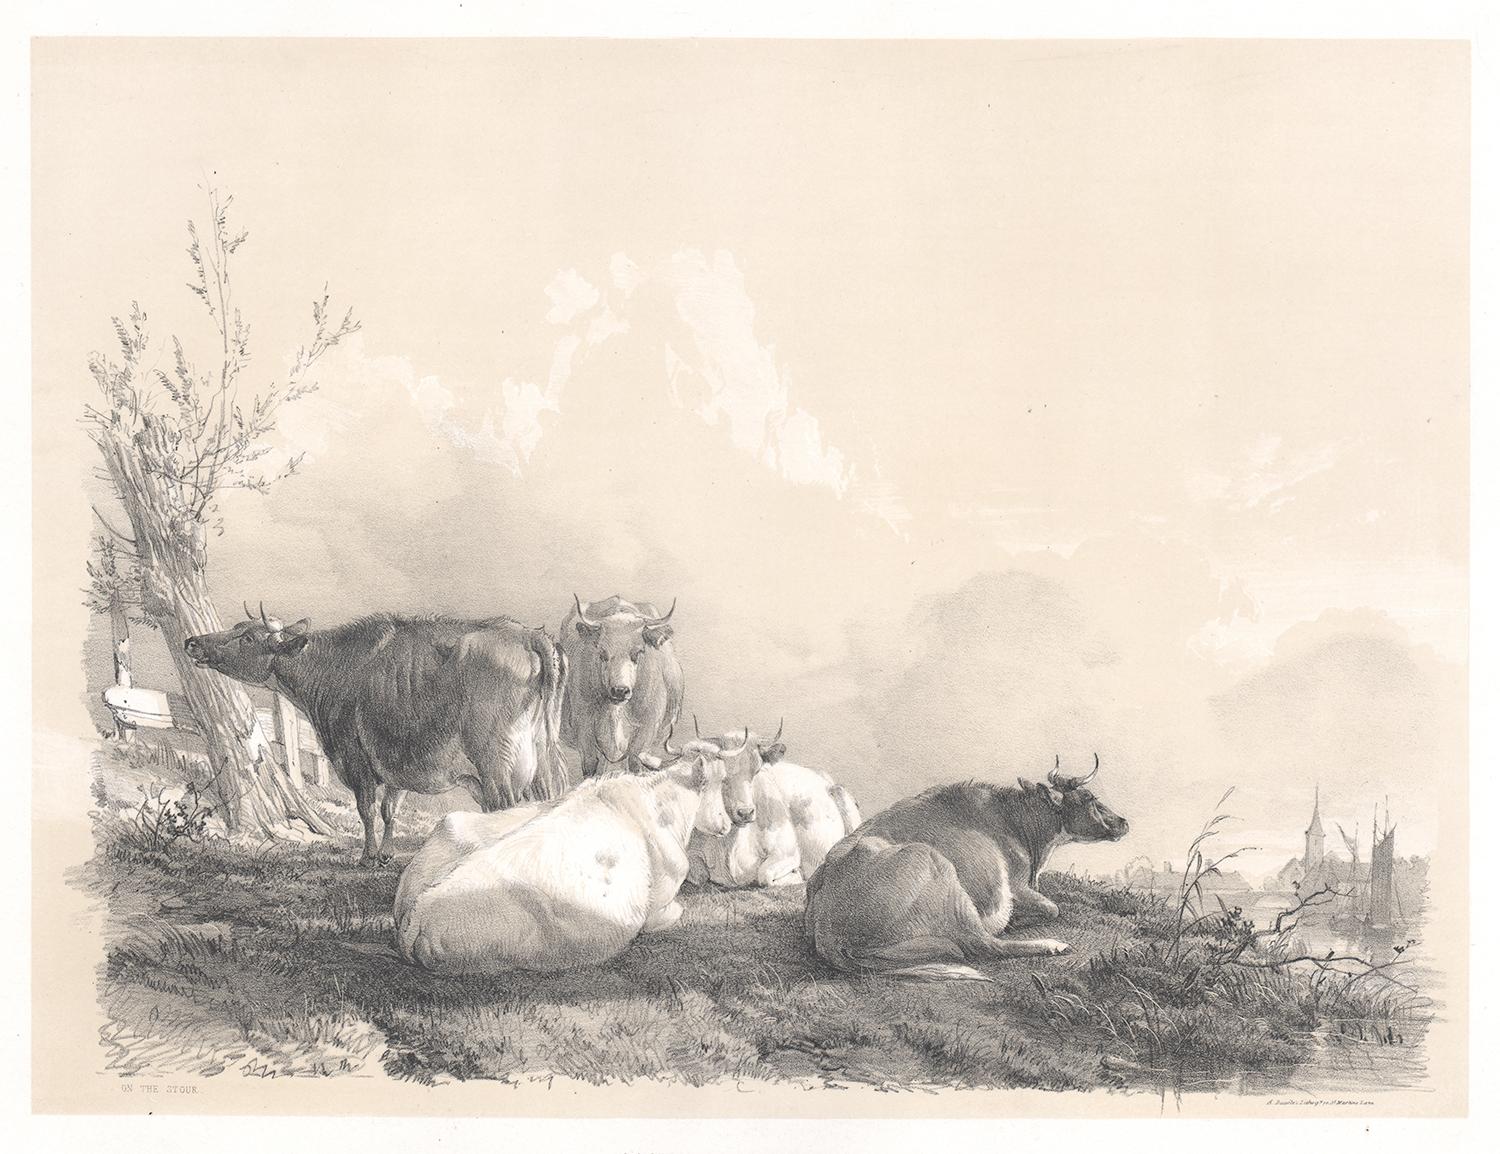 Thomas Sidney Cooper Animal Print - On the Stour, tinted lithograph of cattle, by Thomas Sydney Cooper, 1837